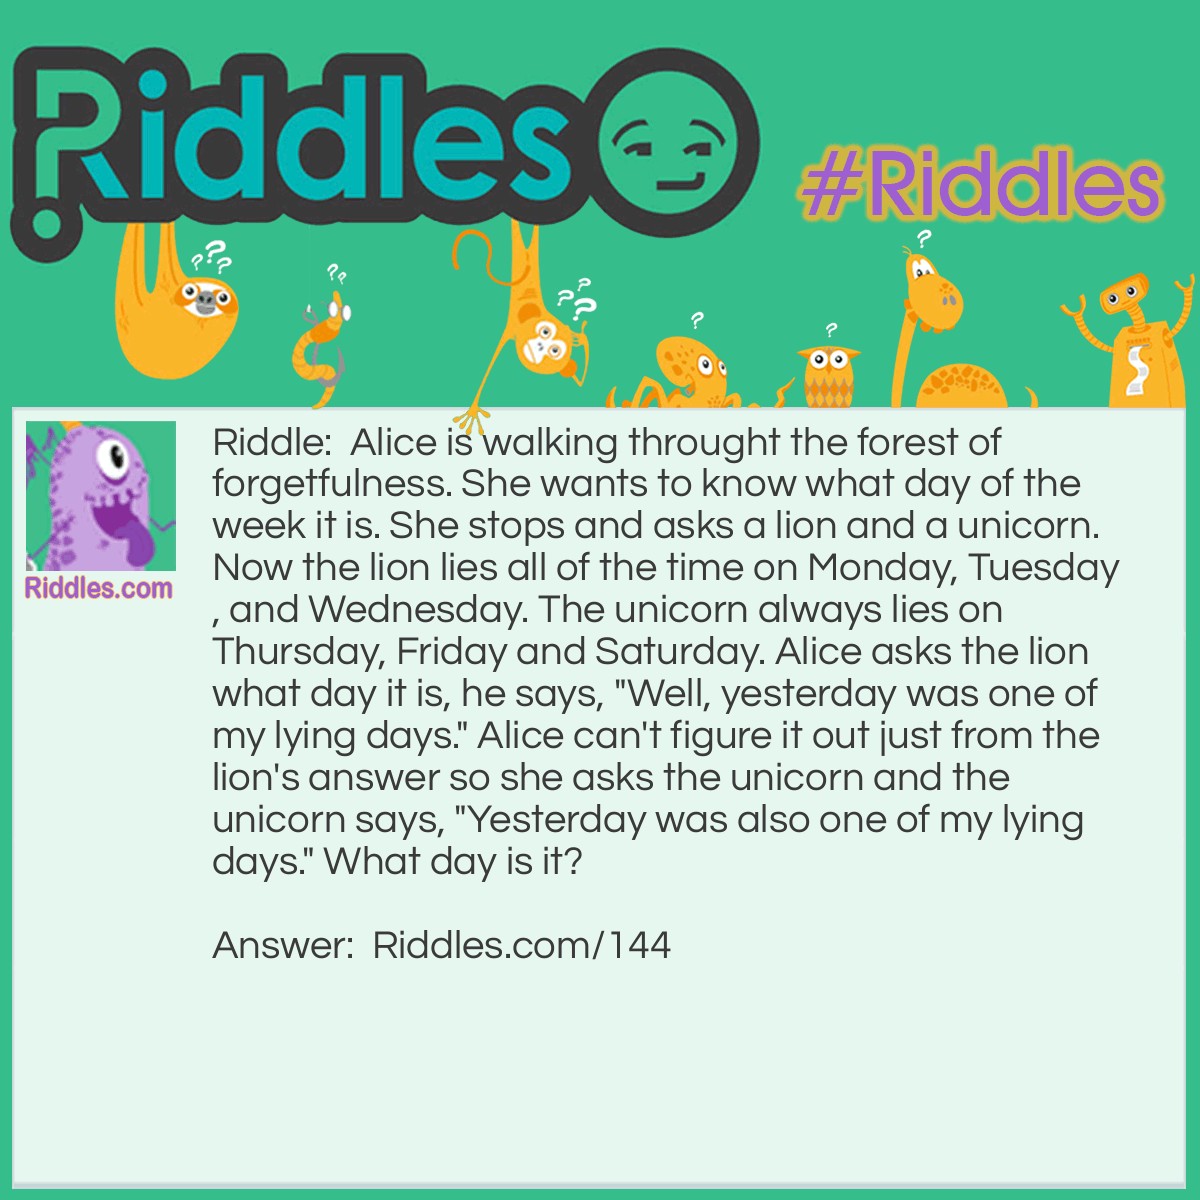 Riddle: Alice is walking through the forest of forgetfulness. She wants to know what day of the week it is. She stops and asks a lion and a unicorn. Now the lion lies all of the time on Monday, Tuesday, and Wednesday. The unicorn always lies on Thursday, Friday, and Saturday. Alice asks the lion what day it is, he says, "Well, yesterday was one of my lying days." Alice can't figure it out just from the lion's answer so she asks the unicorn and the unicorn says, "Yesterday was also one of my lying days." <a href="/6185">What day is it</a>? Answer: Thursday.